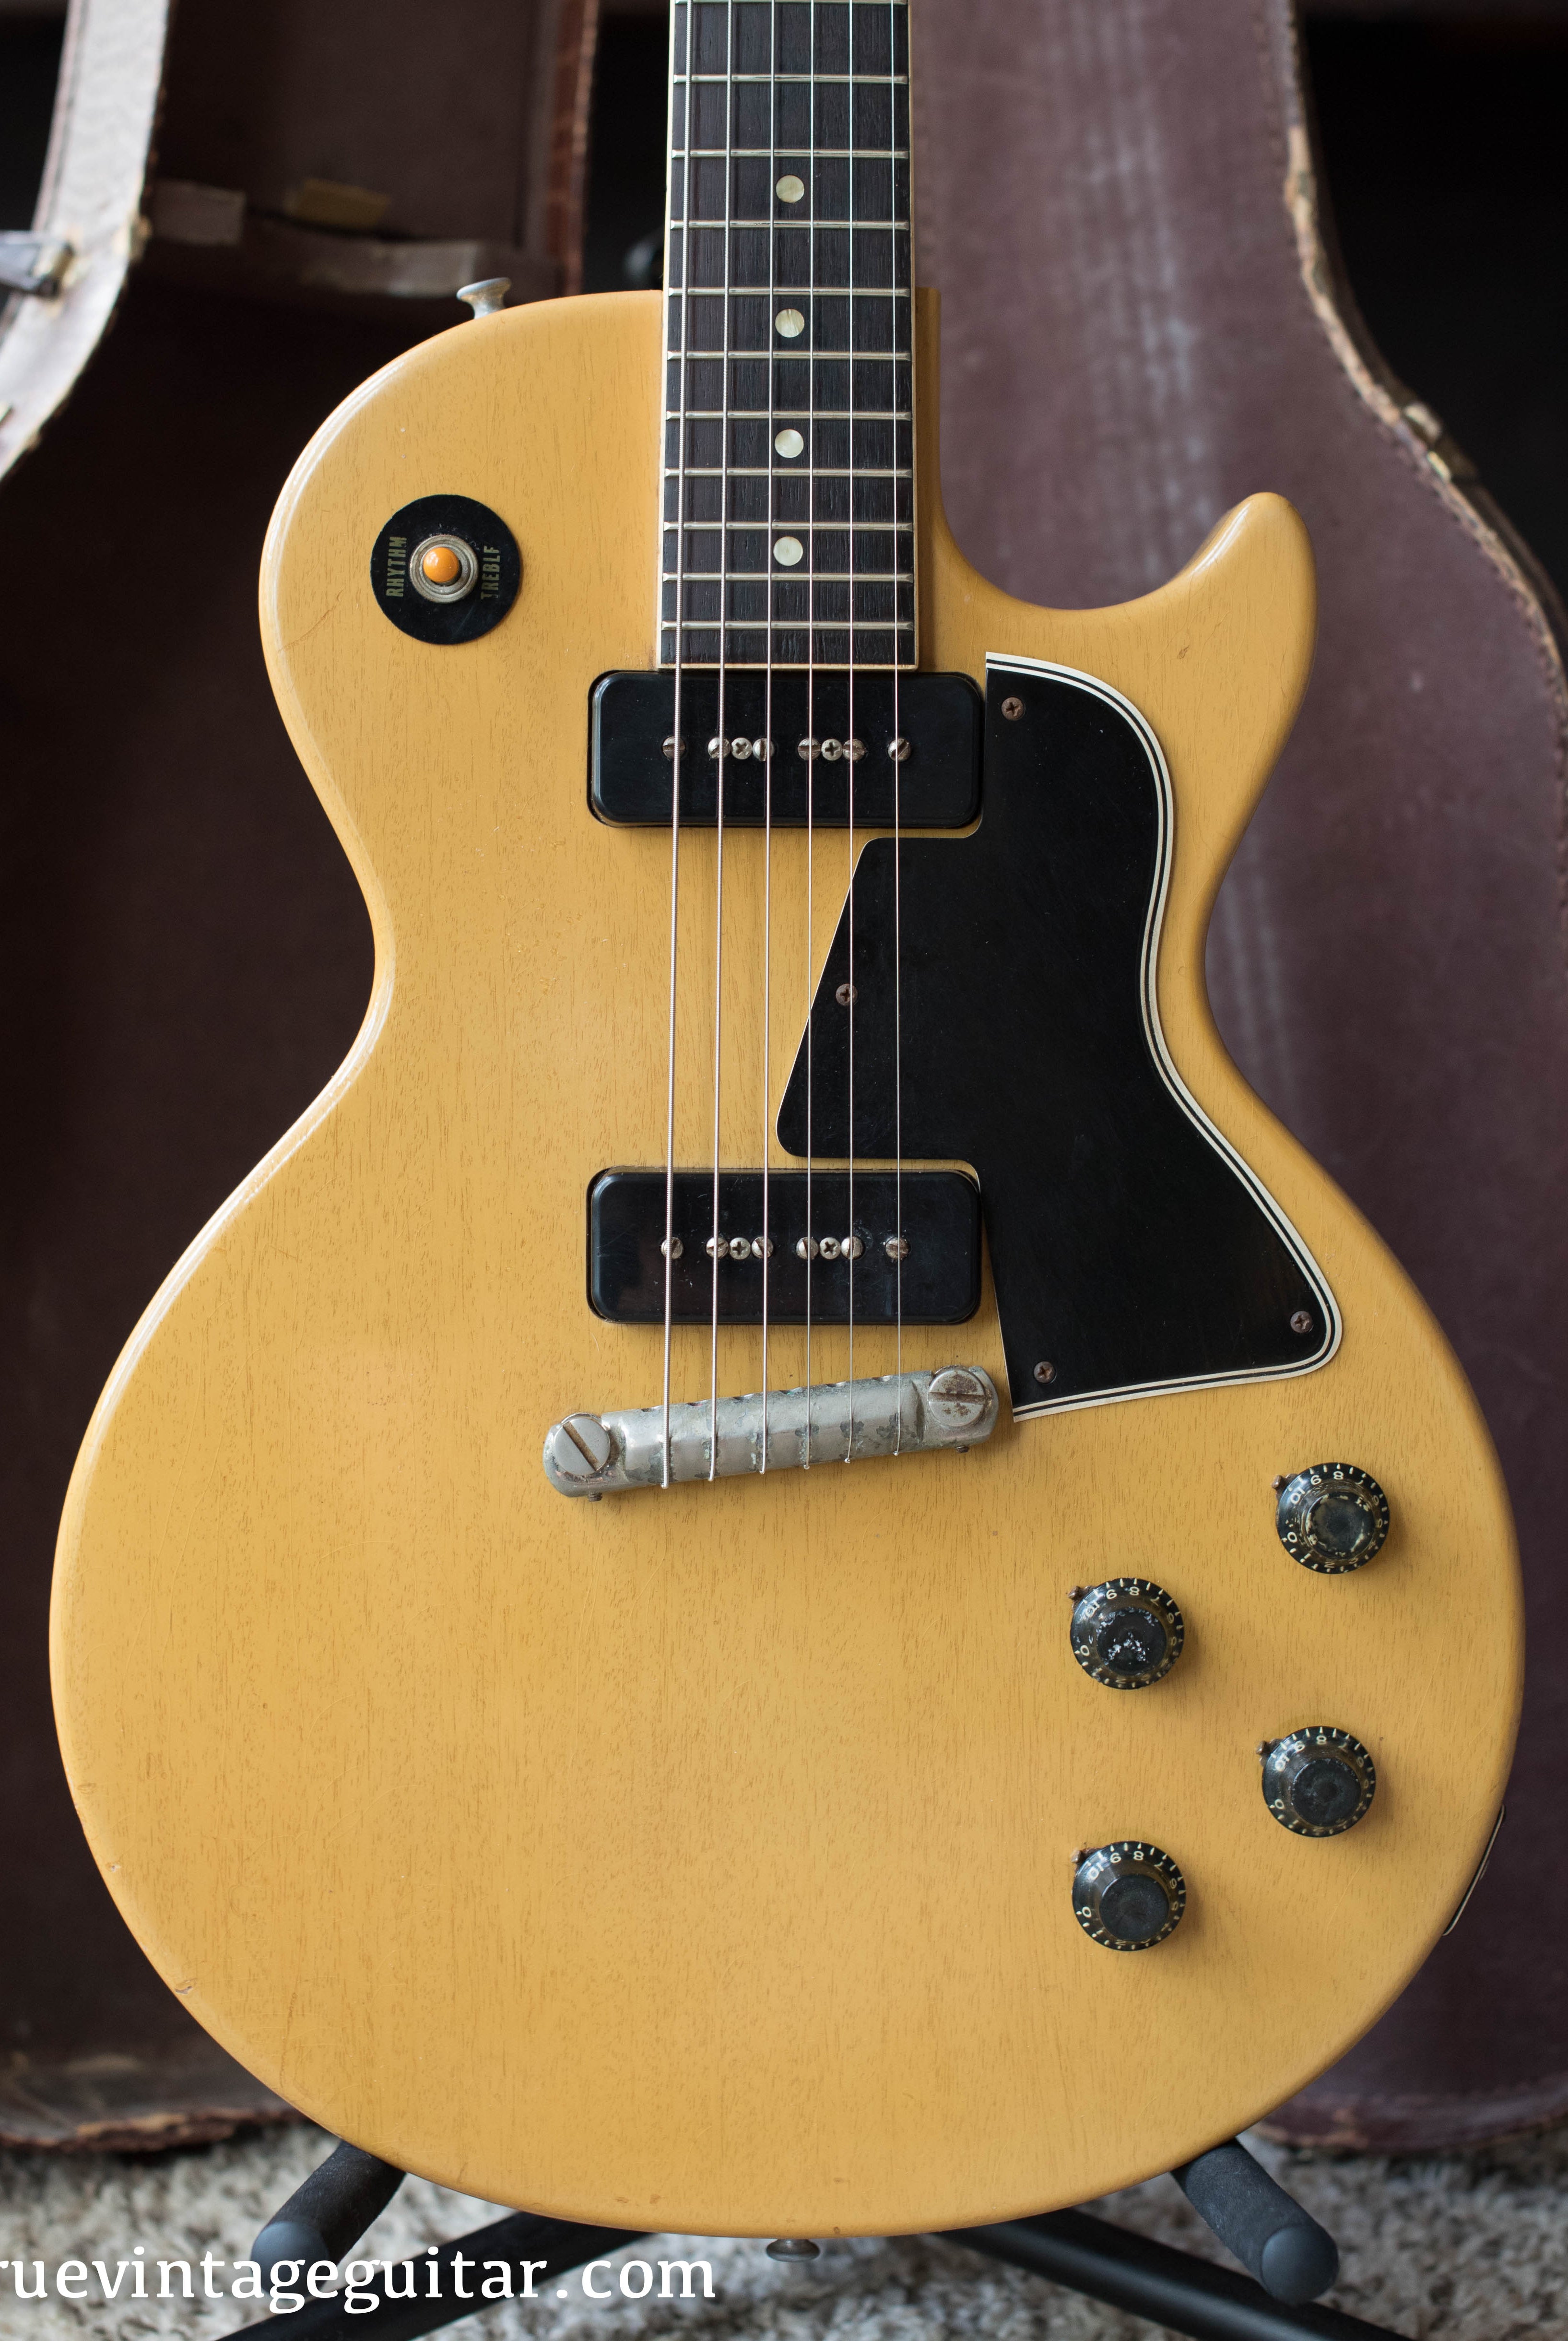 Gibson Les Paul Special 1957 tv yellow